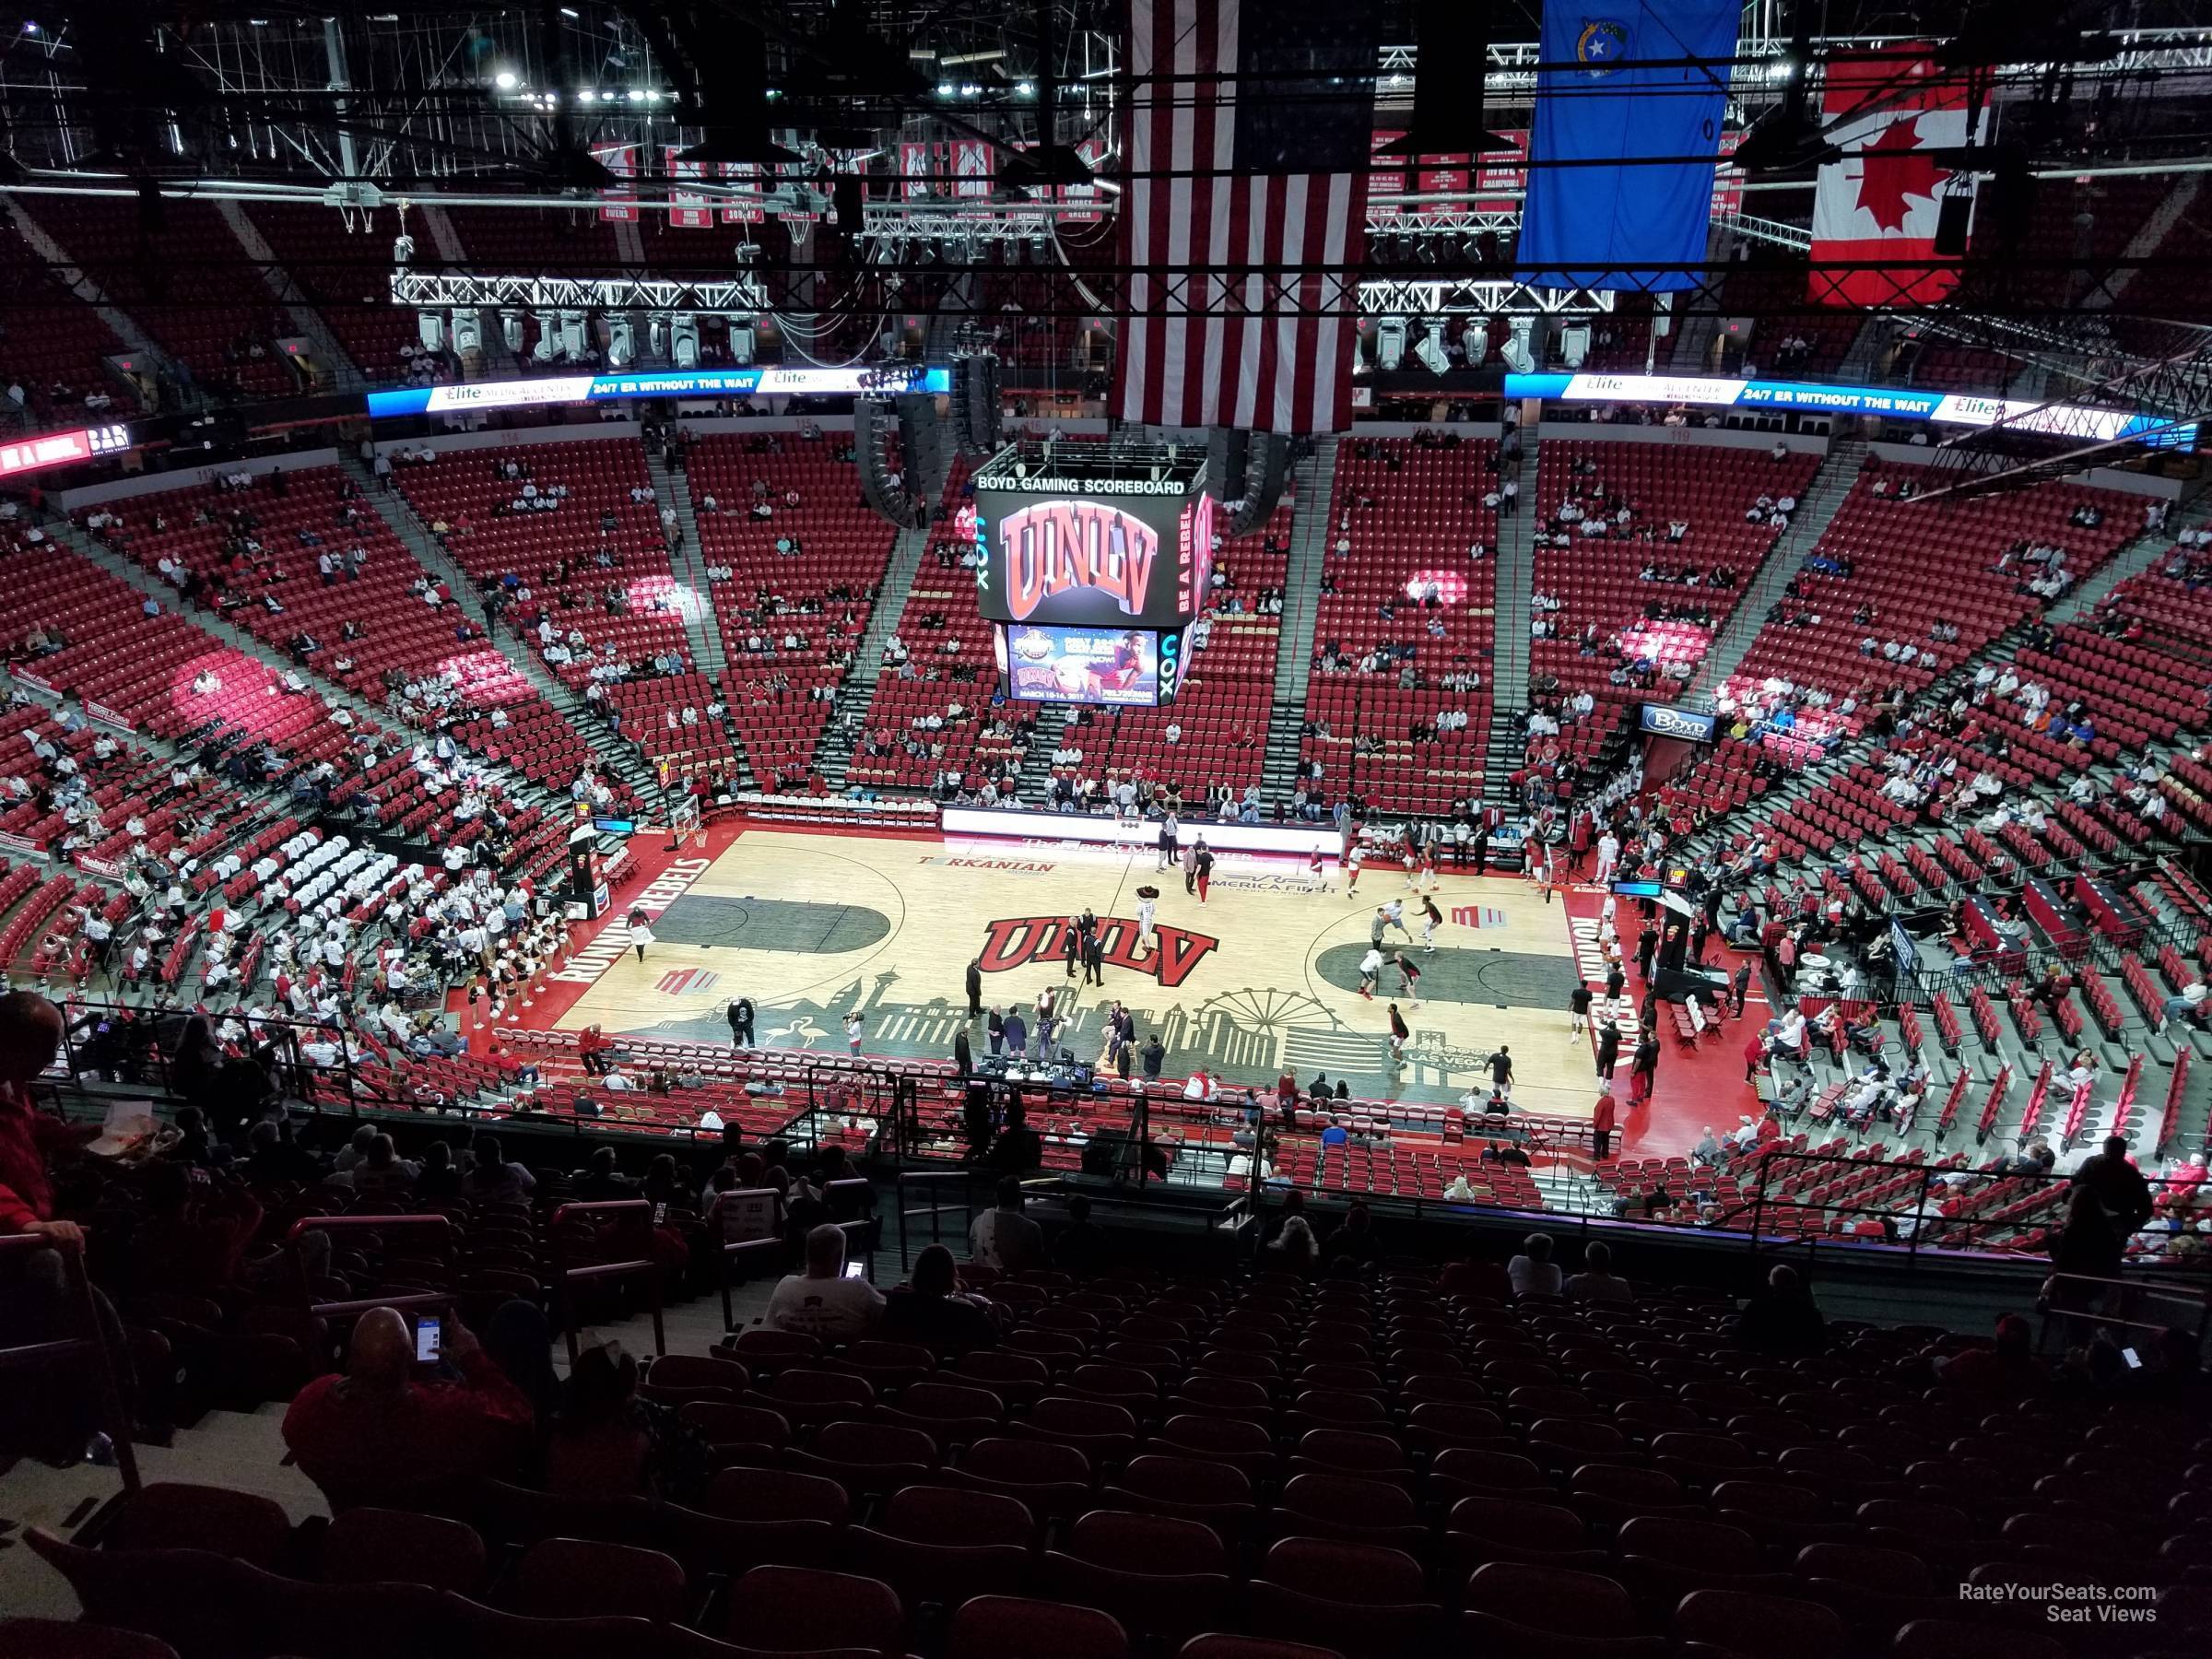 Thomas and Mack Center Section 208 - RateYourSeats.com